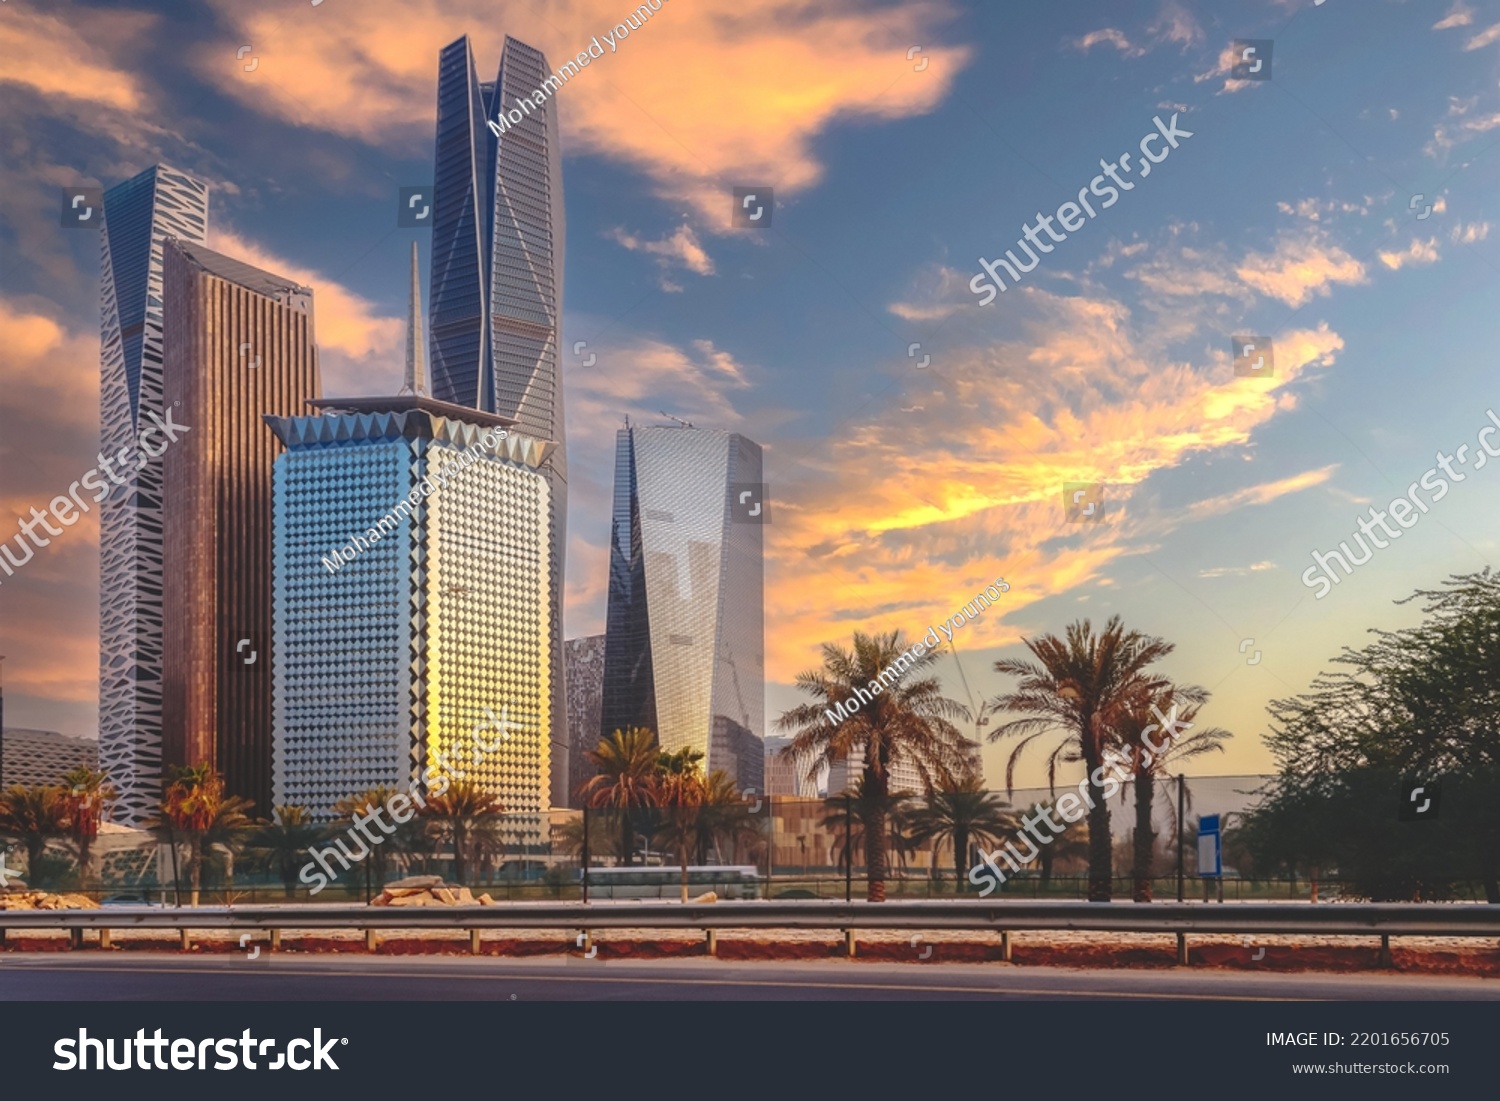 Sunset over large buildings equipped with the latest technology, King Abdullah Financial District, in the capital, Riyadh, Saudi Arabia #2201656705